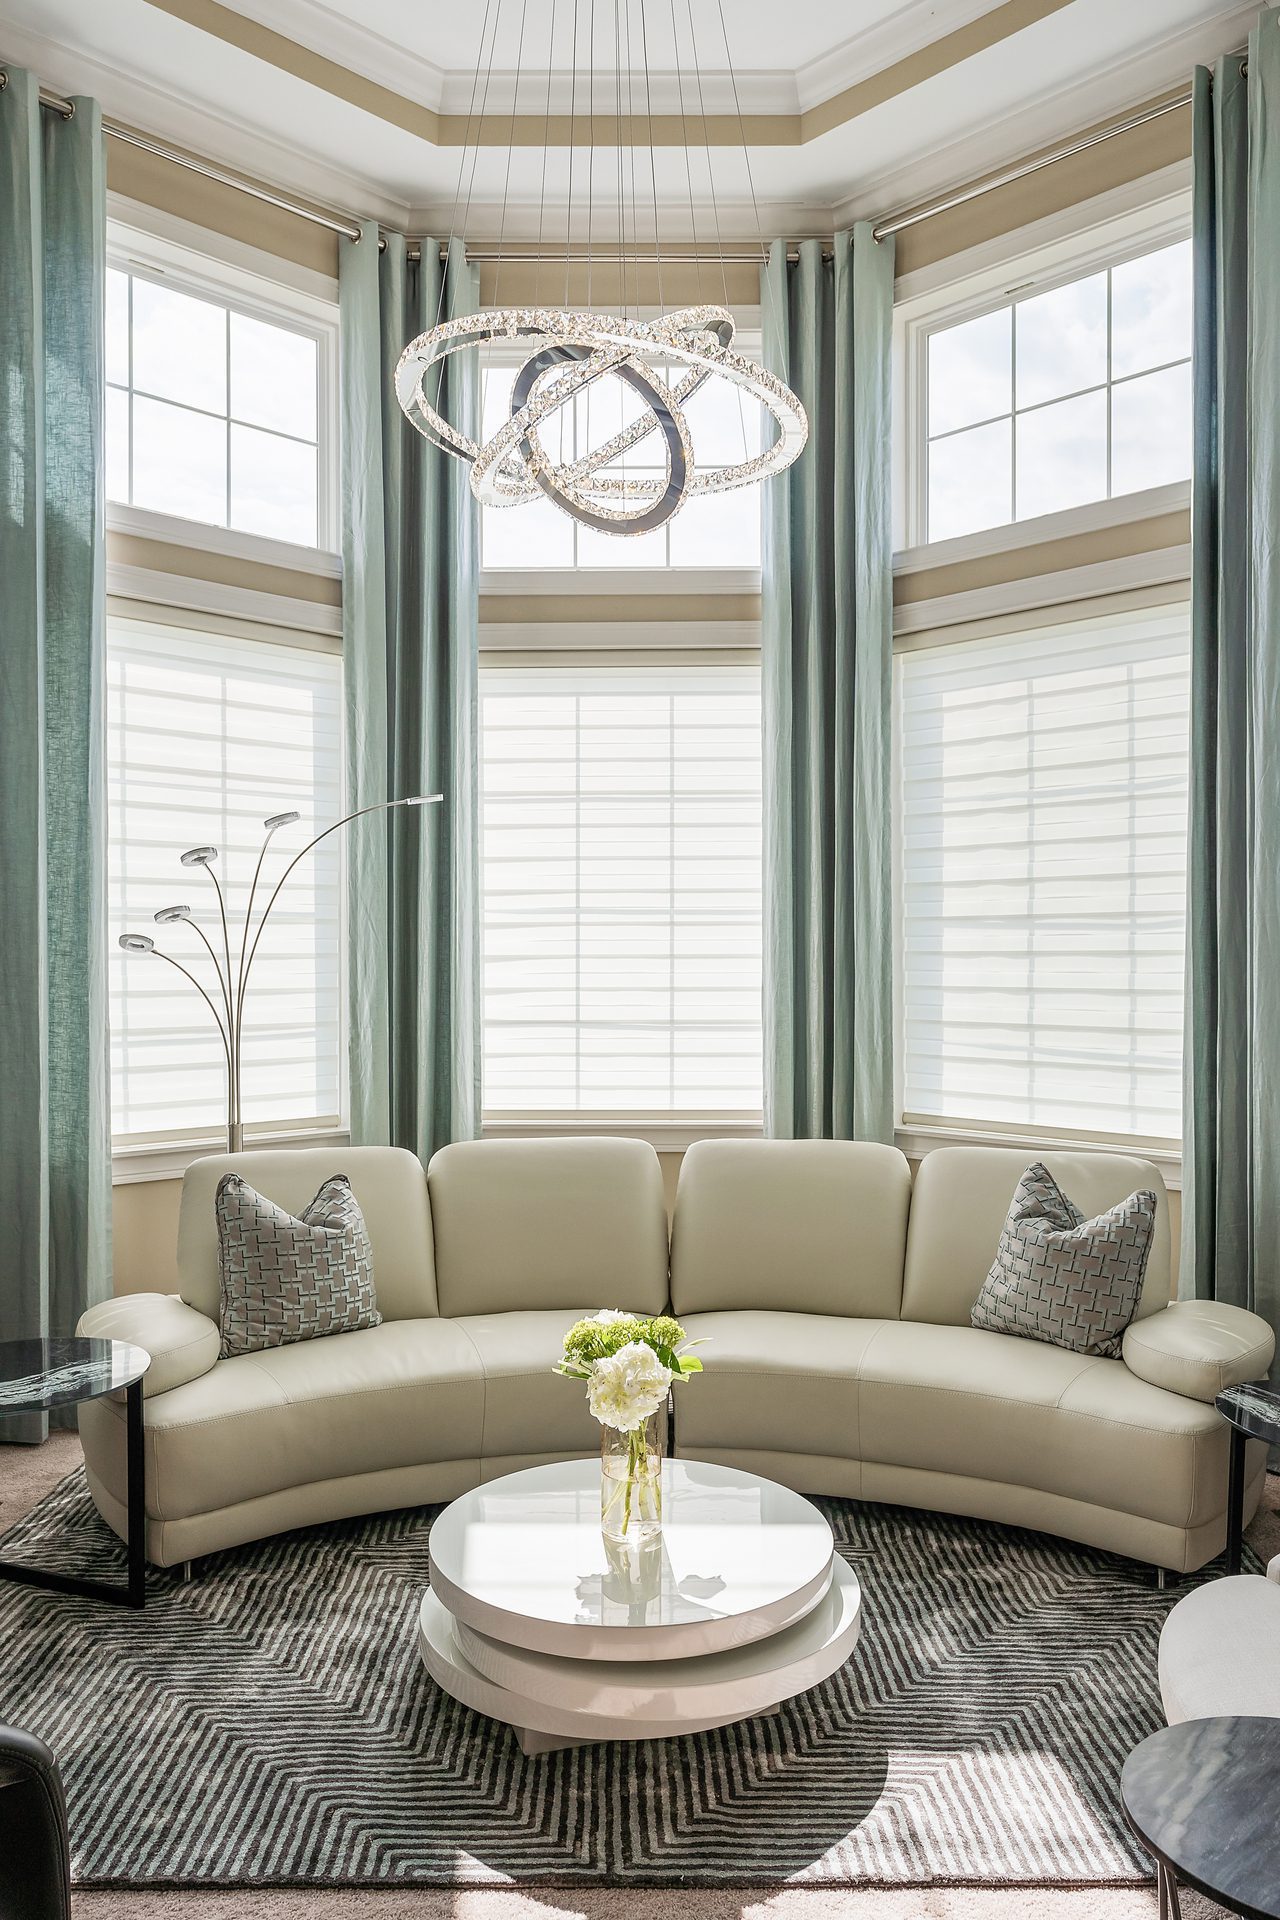 Round couch and tall windows and dynamic, chandelier light featuring intertwining rings.